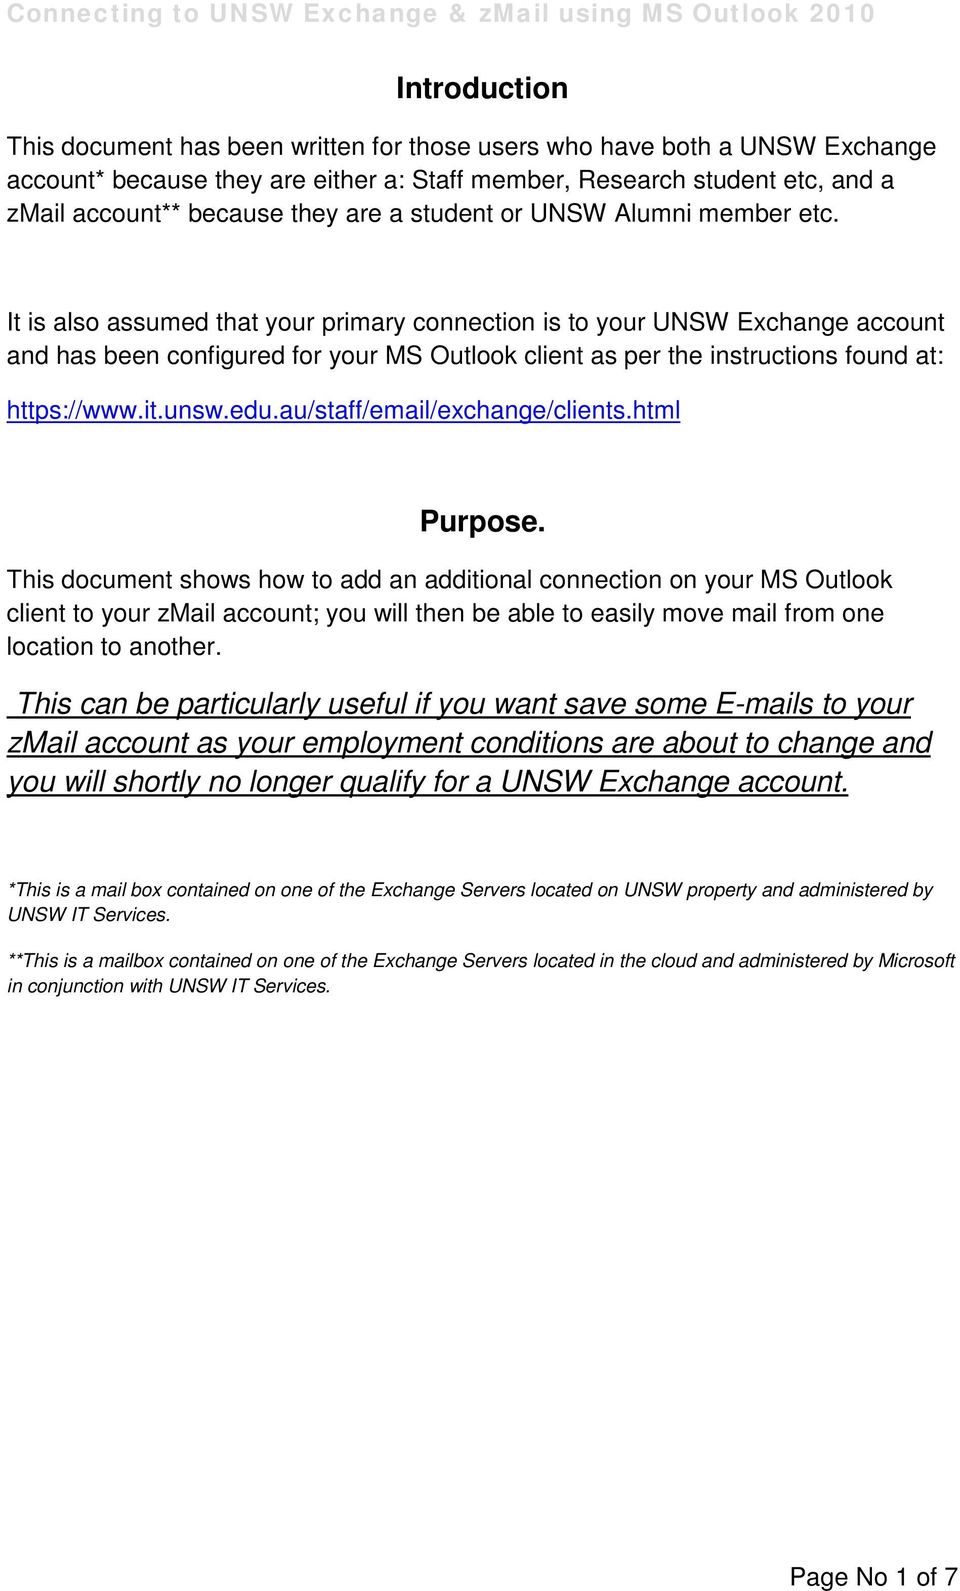 It is also assumed that your primary connection is to your UNSW Exchange account and has been configured for your MS Outlook client as per the instructions found at: https://www.it.unsw.edu.